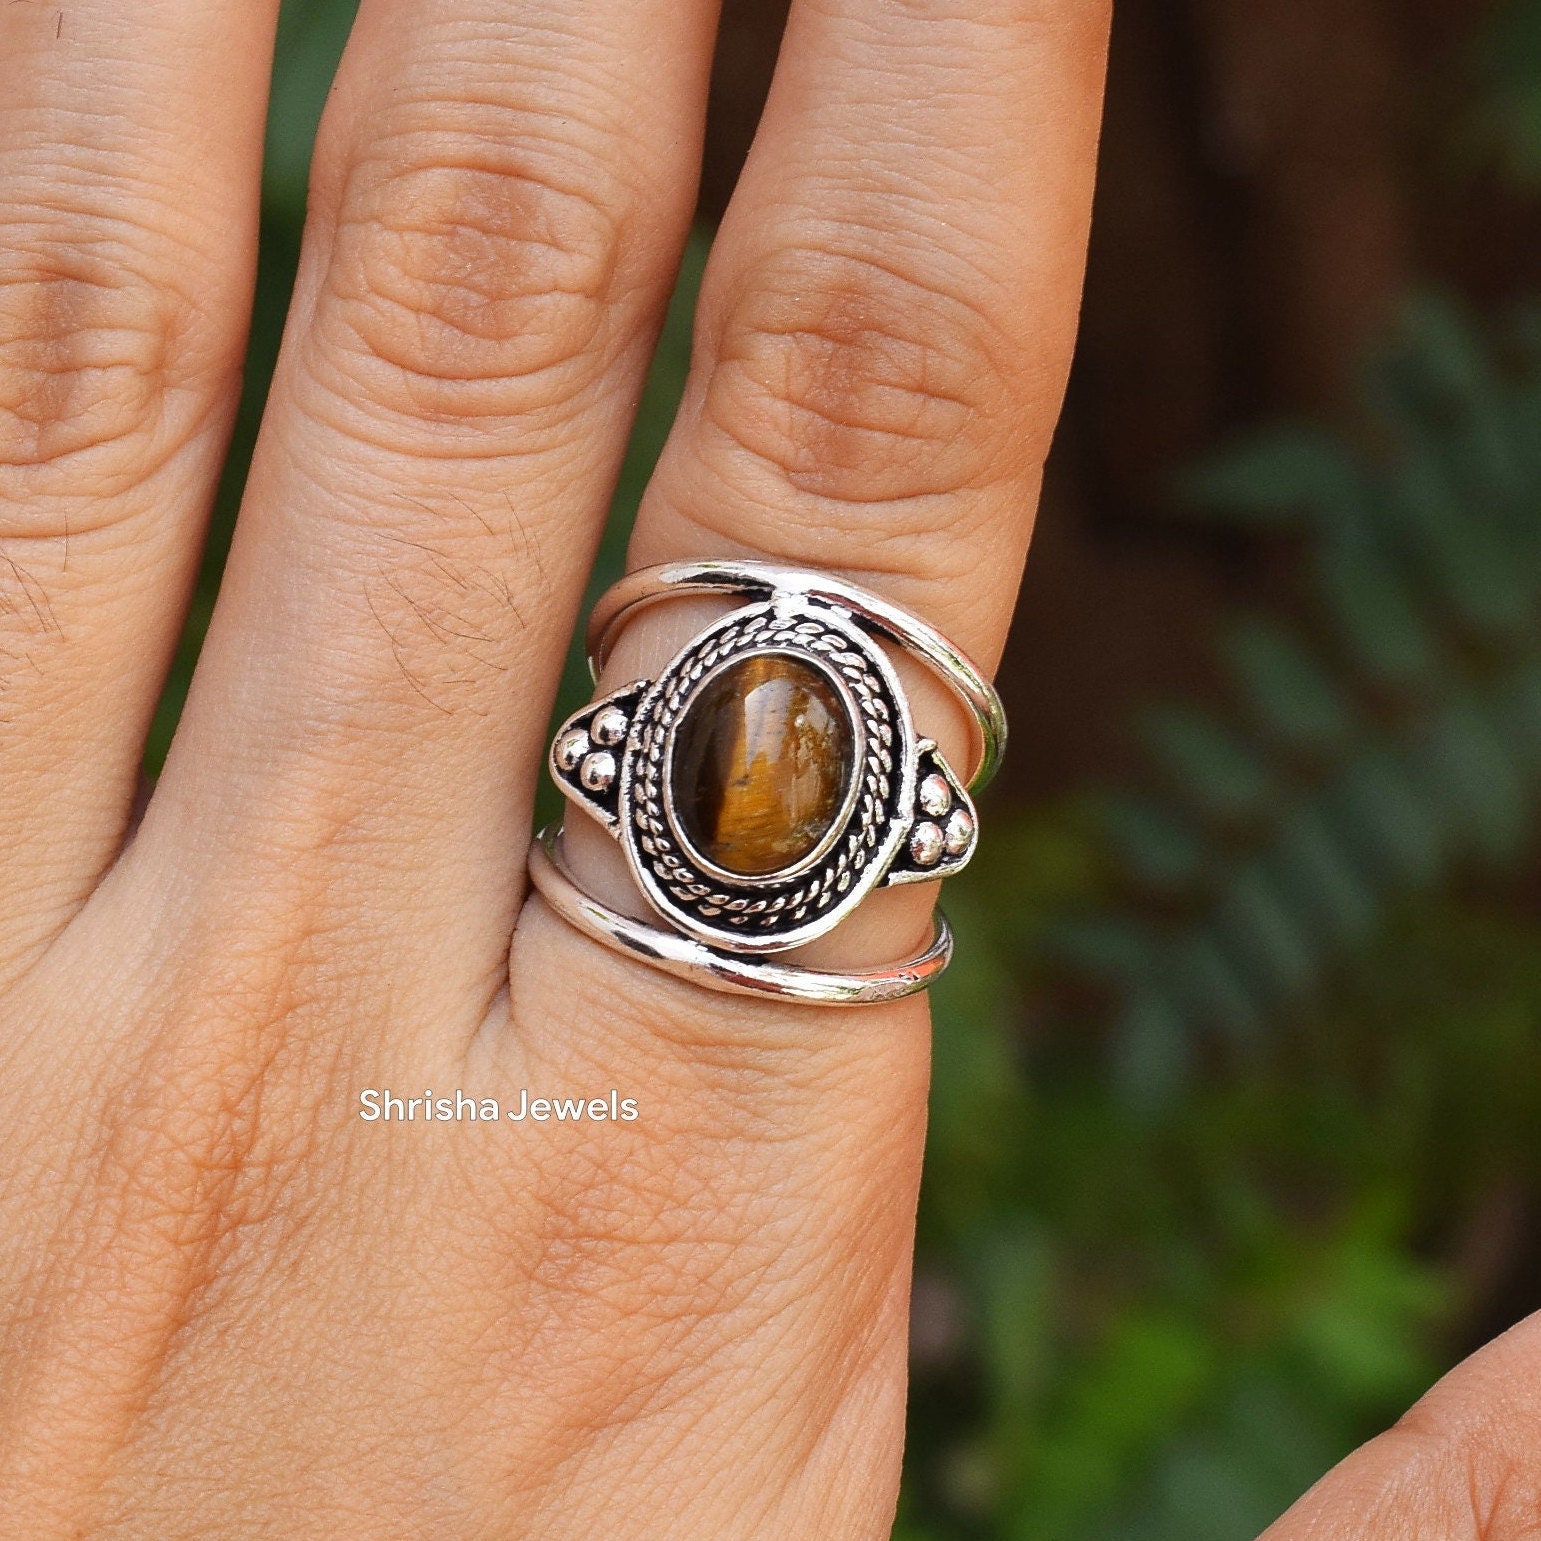 Keepsake Wife Statement Rings Custom Elegant Rings for Ladies Vintage Jewelry for Women Oval Engagement Gifts for Mom Sister Unique Tiger Eye Ring in 14k Gold Fashion 